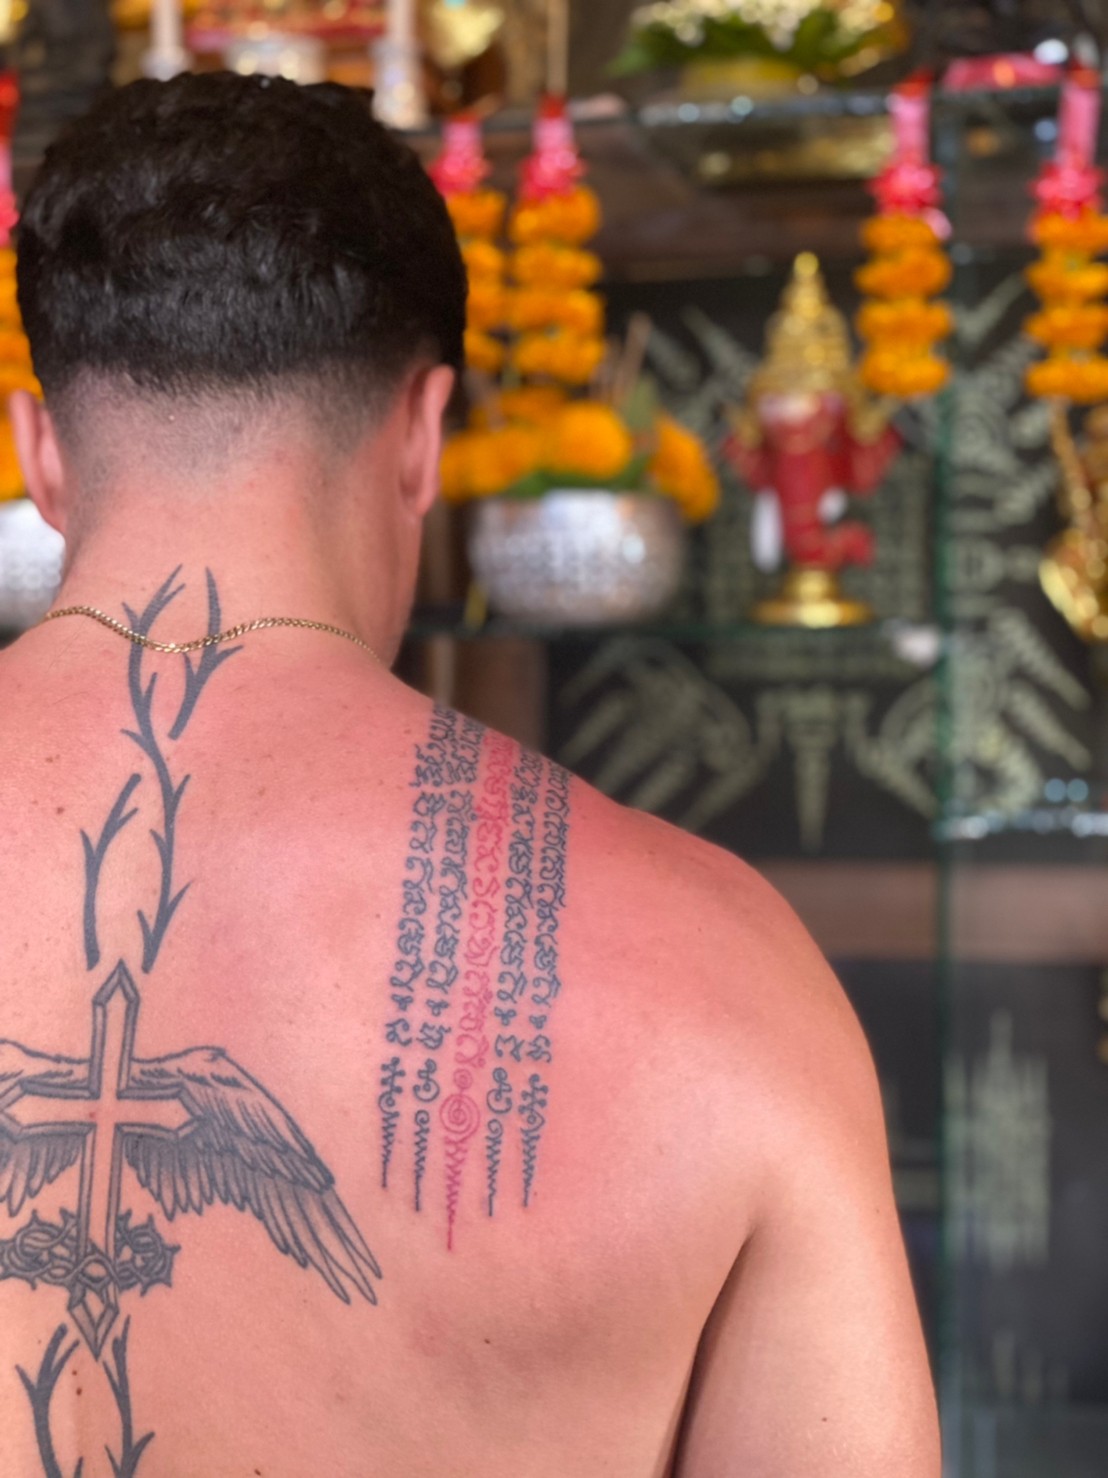 Getting A Bamboo Tattoo In Thailand - Everything You Need To Know!